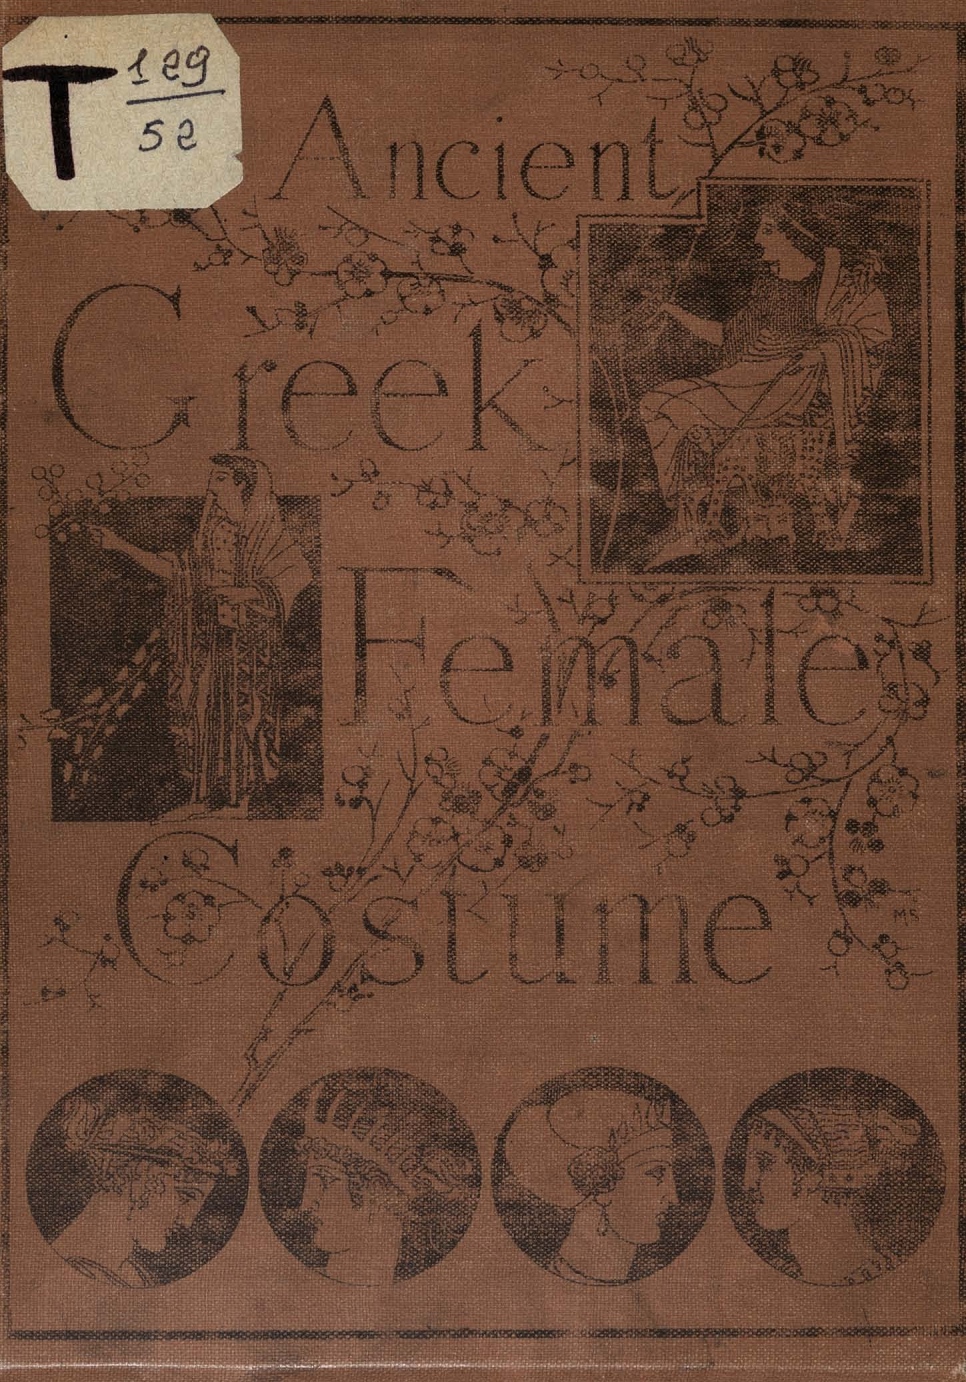 Ancient greek female costume : Illustrated by one hundred and twelve plates and numerous smaller illustrations : With explanatory letterpress, and descriptive passages from the works of Homer, Hesiod, Herodotus, Æschylus, Euripides, Aristophanes, Theocritus, Xenophon, Lucian, and other greek authors, / selected by J. Moyr Smith. — London : Sampson Low, Marston, Searle & Rivington, 1882